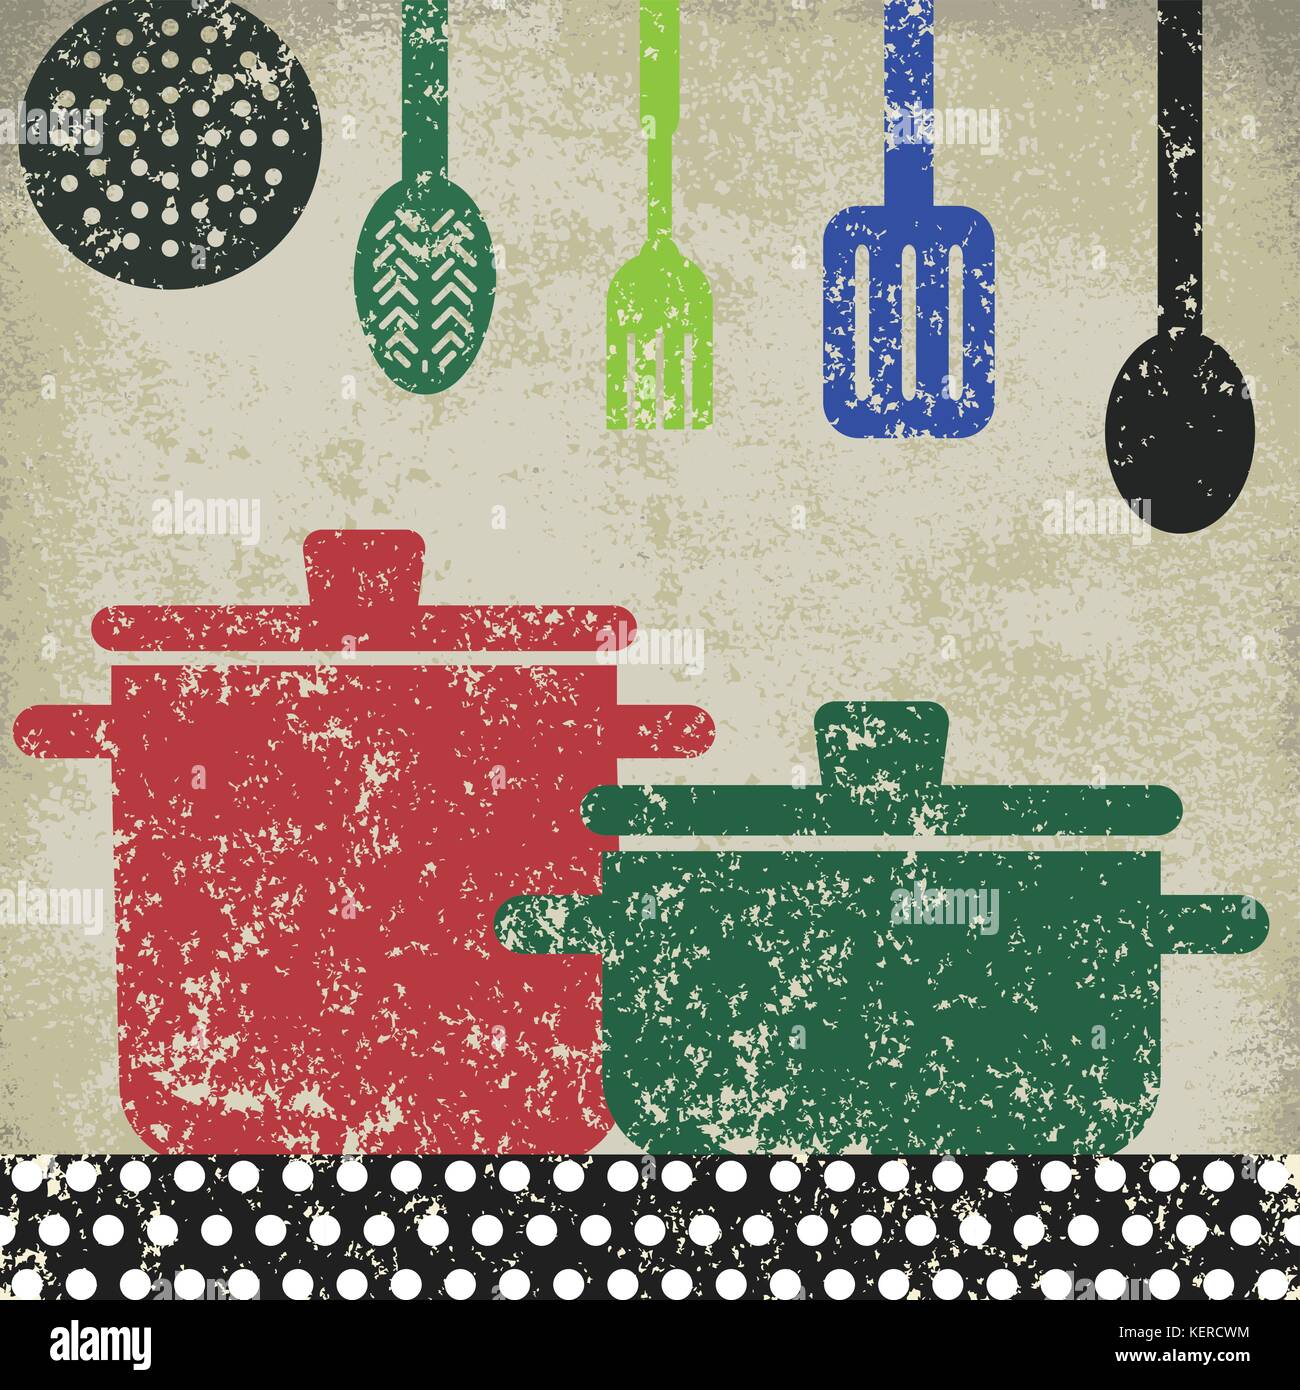 Vintage poster with cooking related objects. Stock Vector